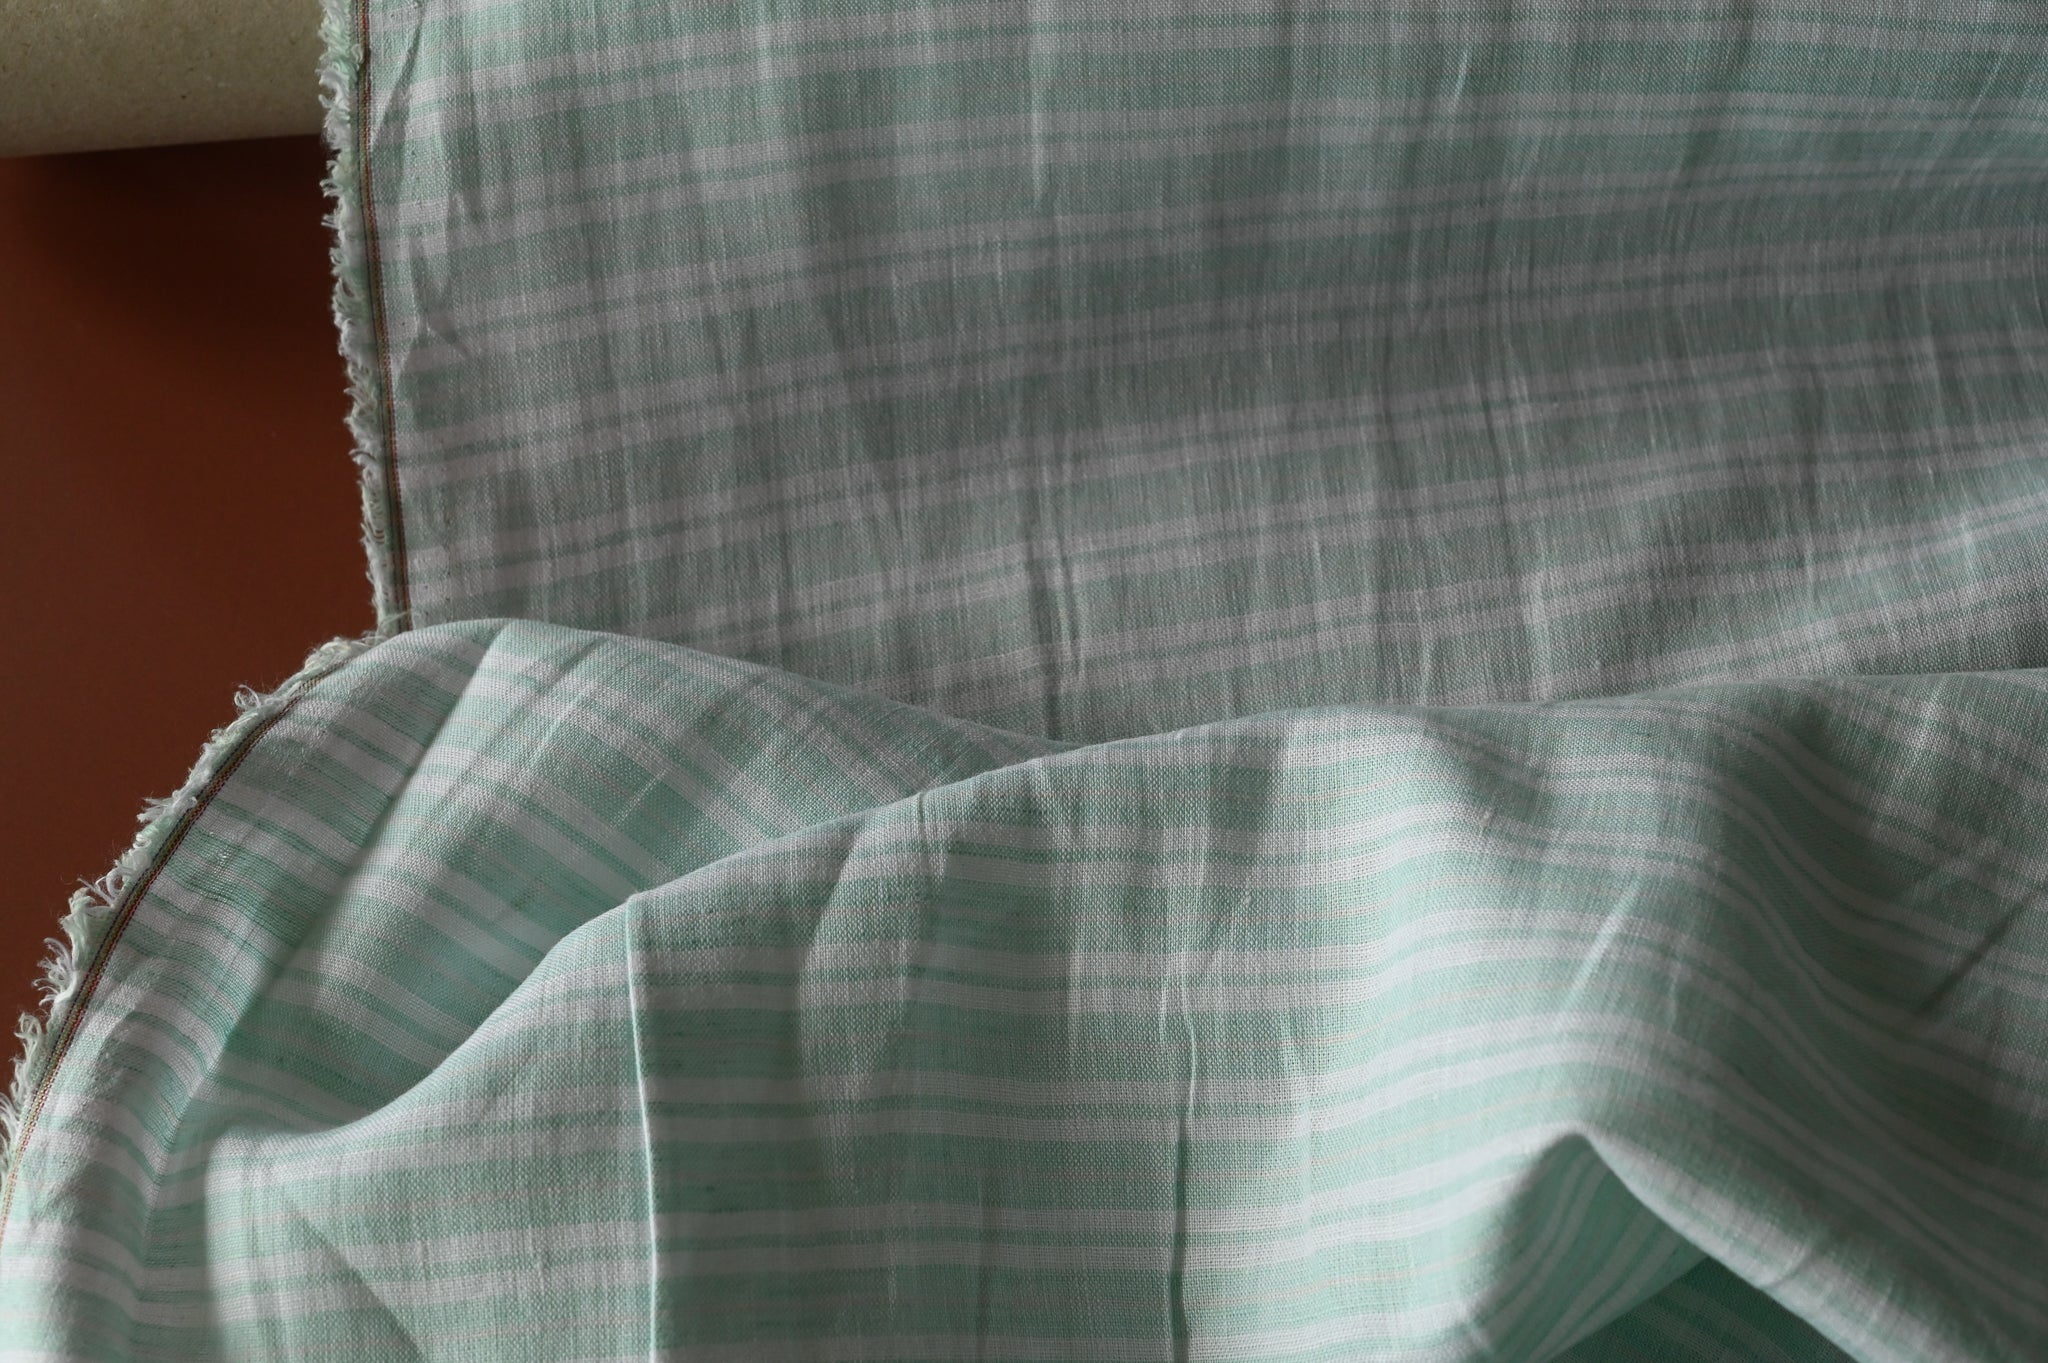 What A Stripy Load of Beauty ( Pale Aqua and White) - Linen